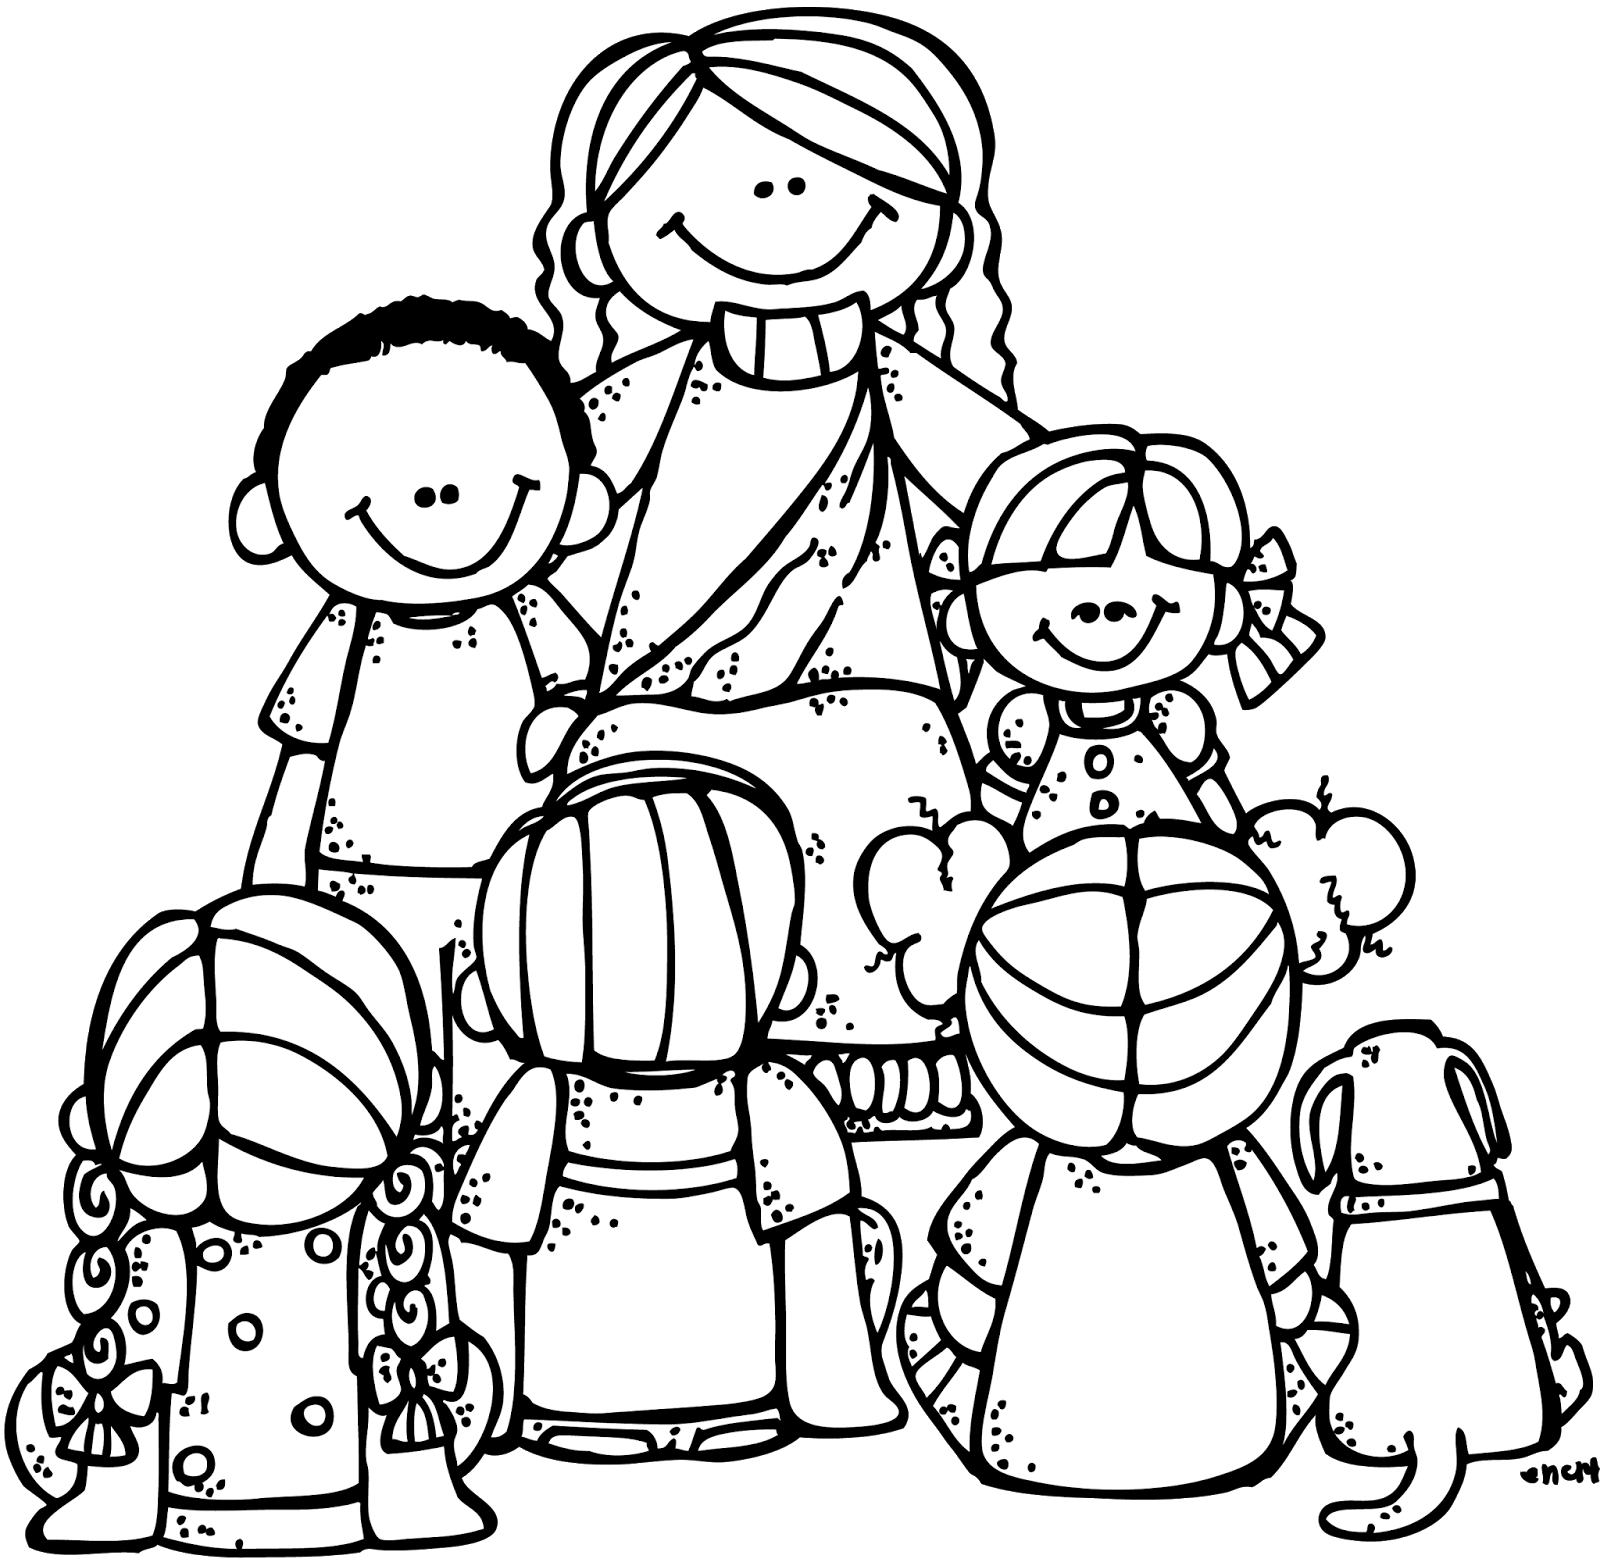 1000+ images about Primary | Lds coloring pages ...